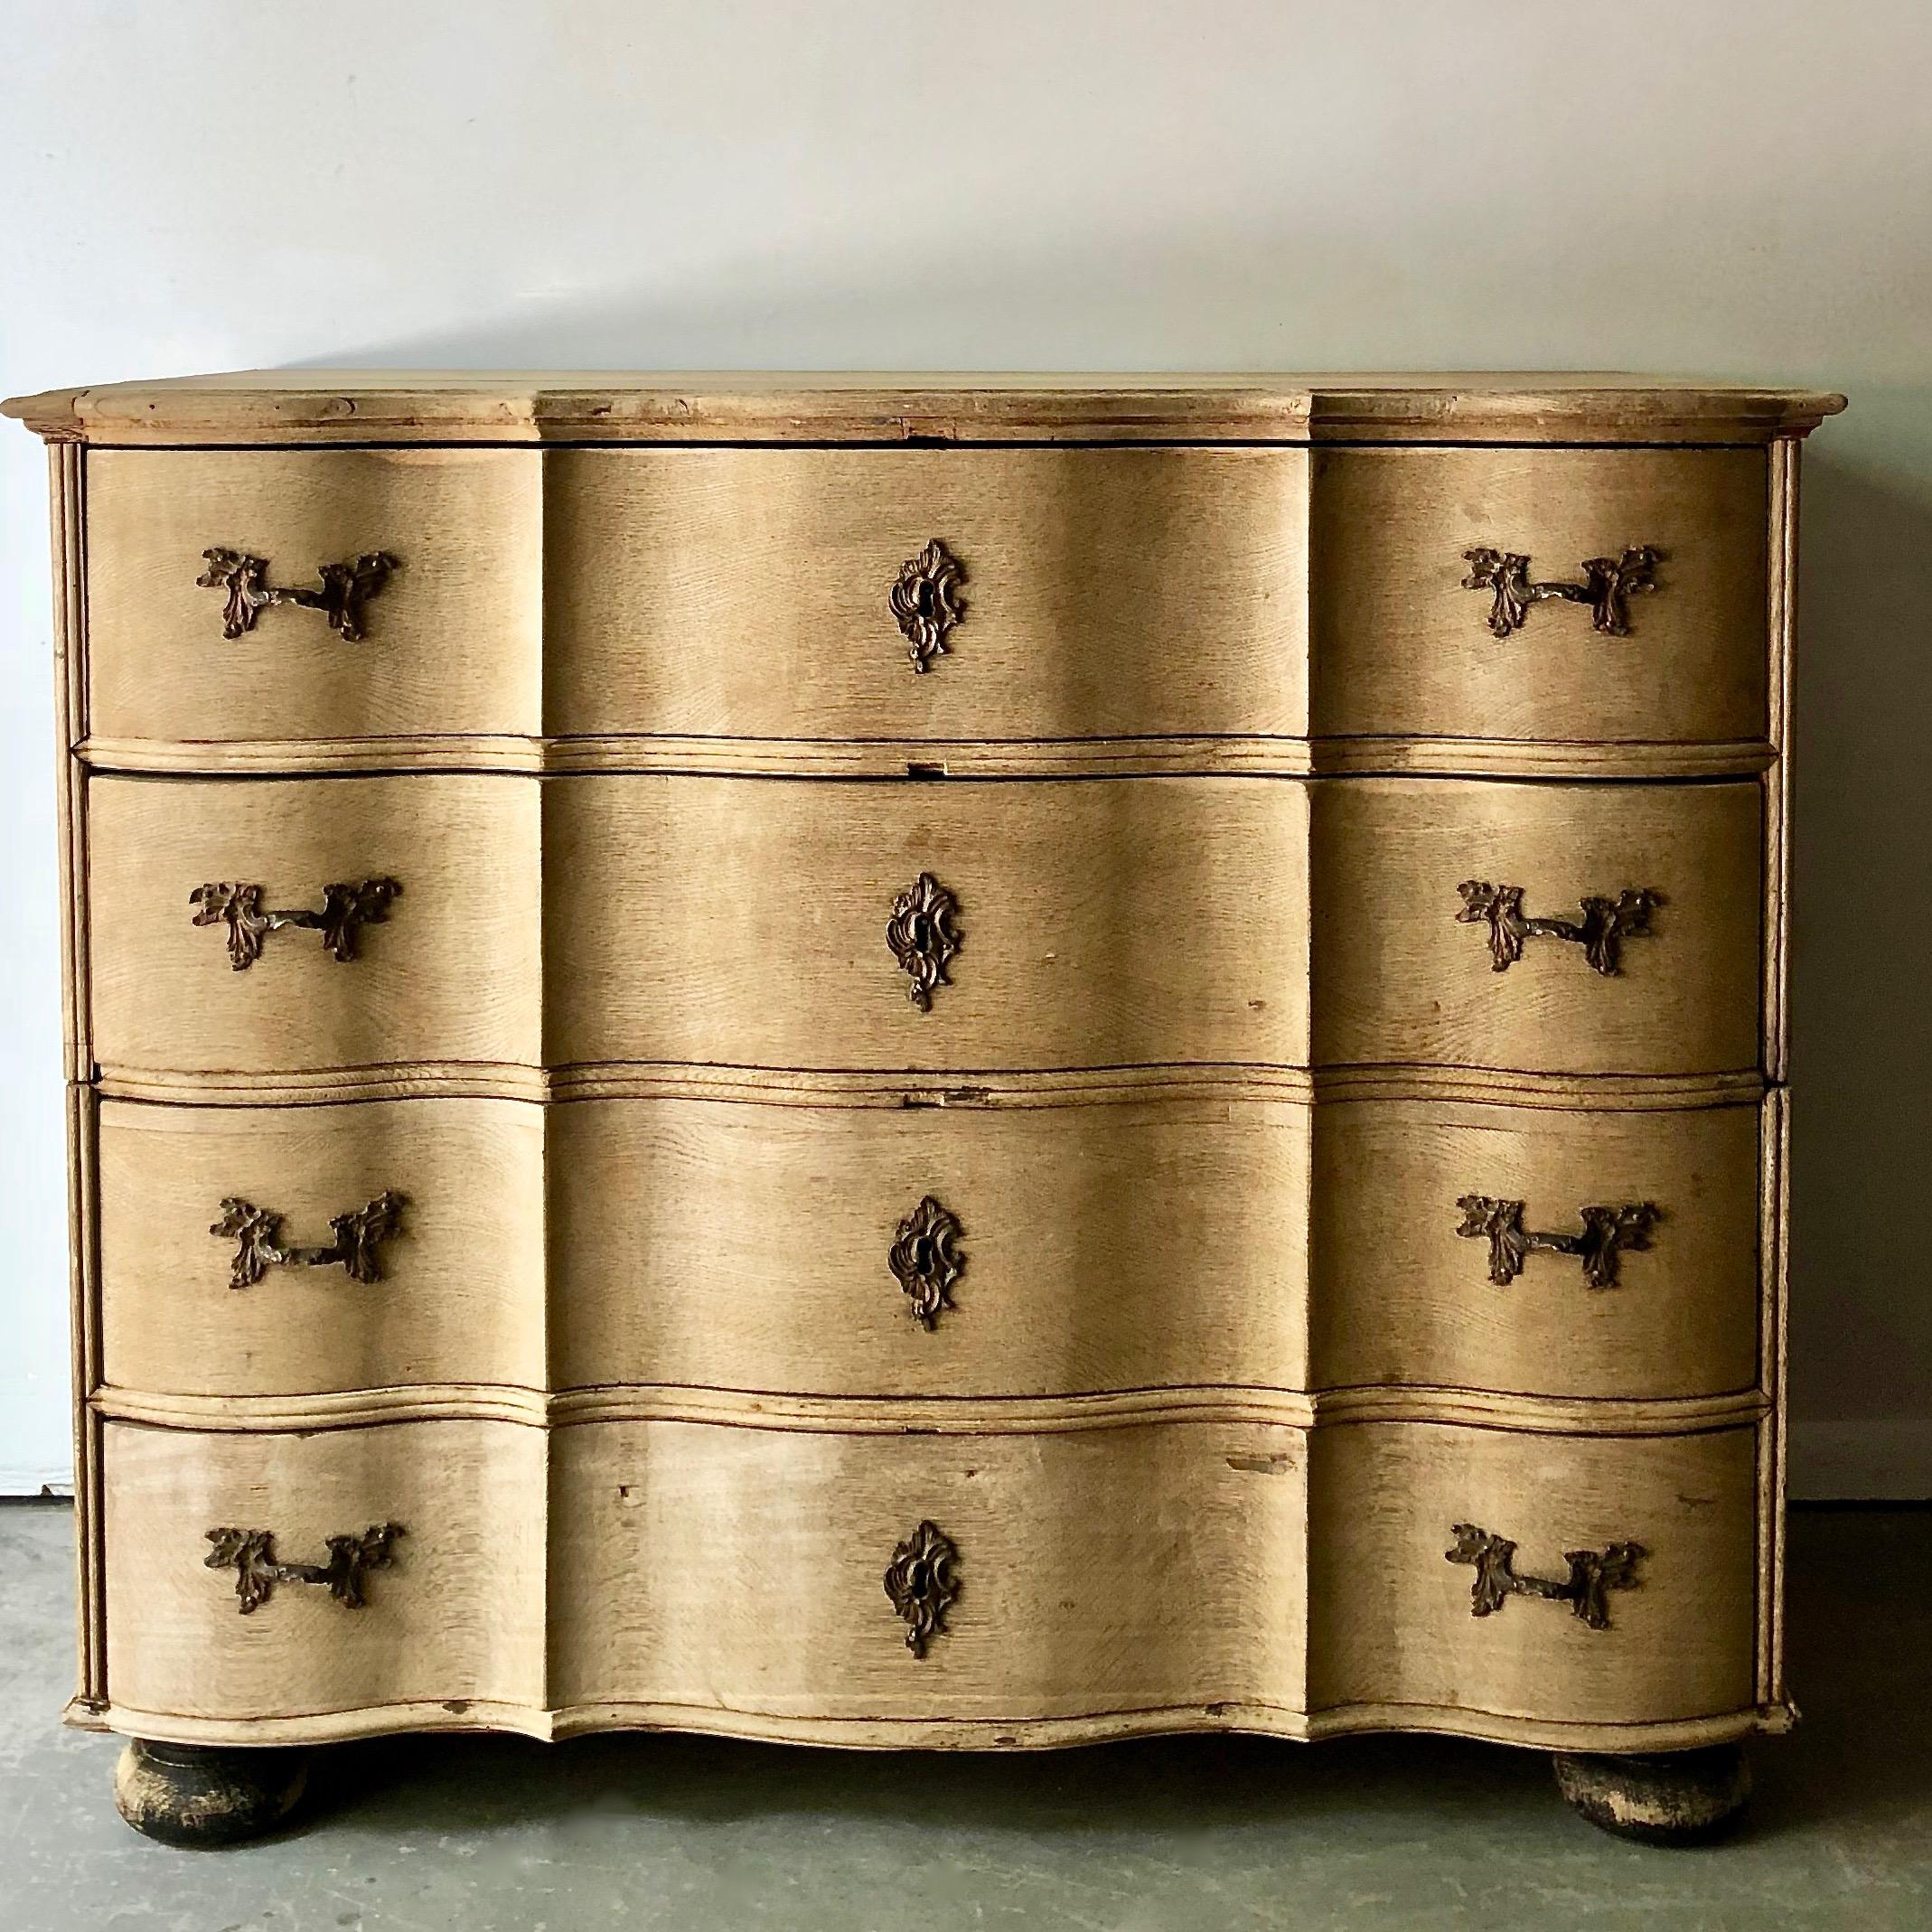 19th century chest of drawers in richly carved bleached oak with curvaceous serpentine drawer fronts, handsome bronze hardwares and shaped top and ball feet. The chest is in two parts for convent travels. 
Denmark, circa 1850. 
More than ever, we